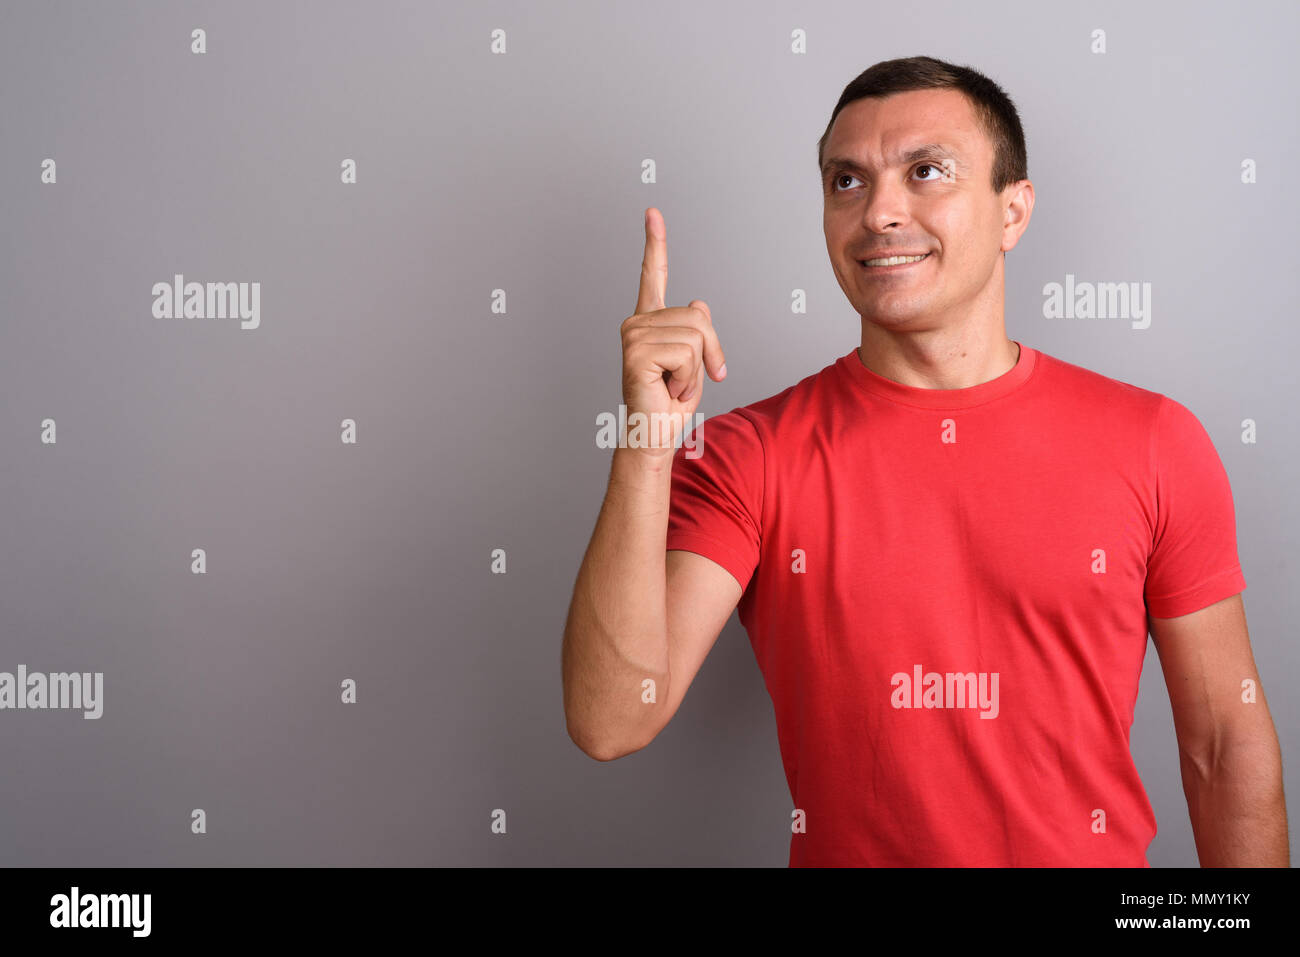 Man wearing red shirt against gray background Stock Photo